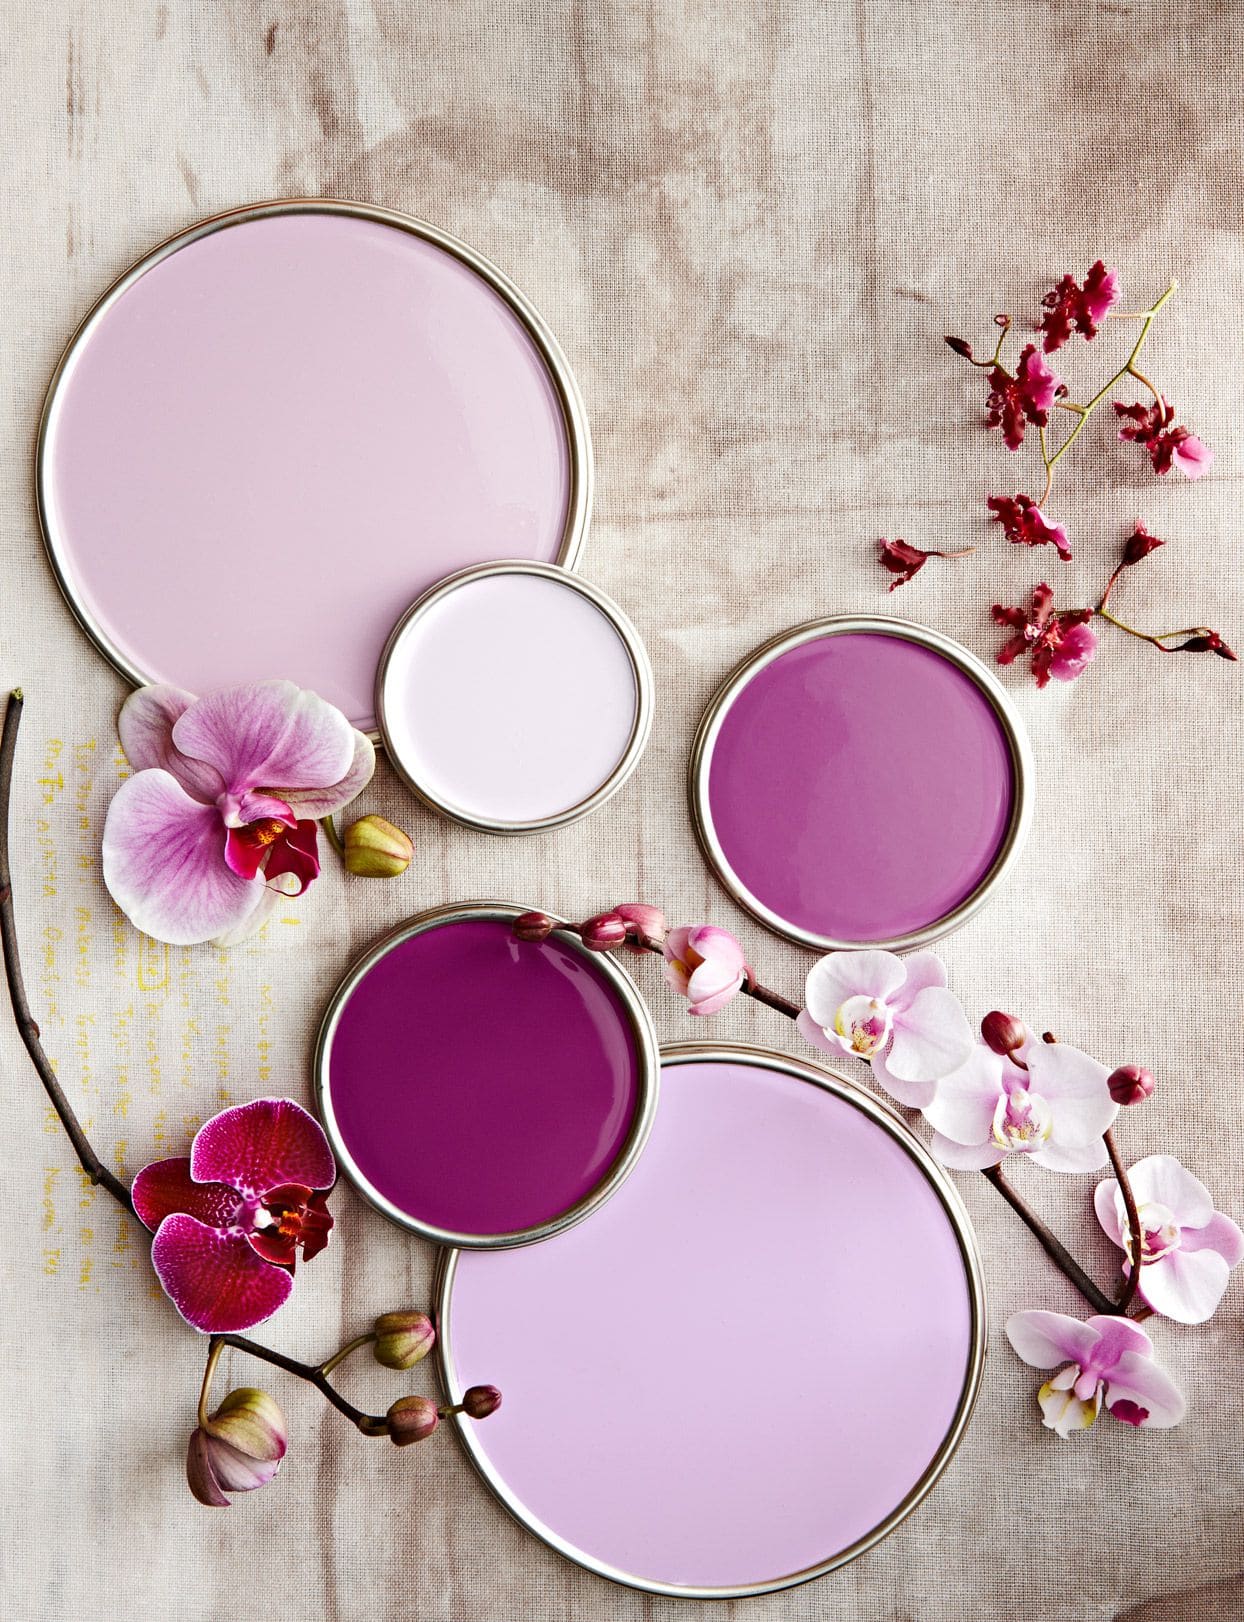 Purple Tranquility: Utilizing Lavender And Mauve for a Soothing And Dreamy